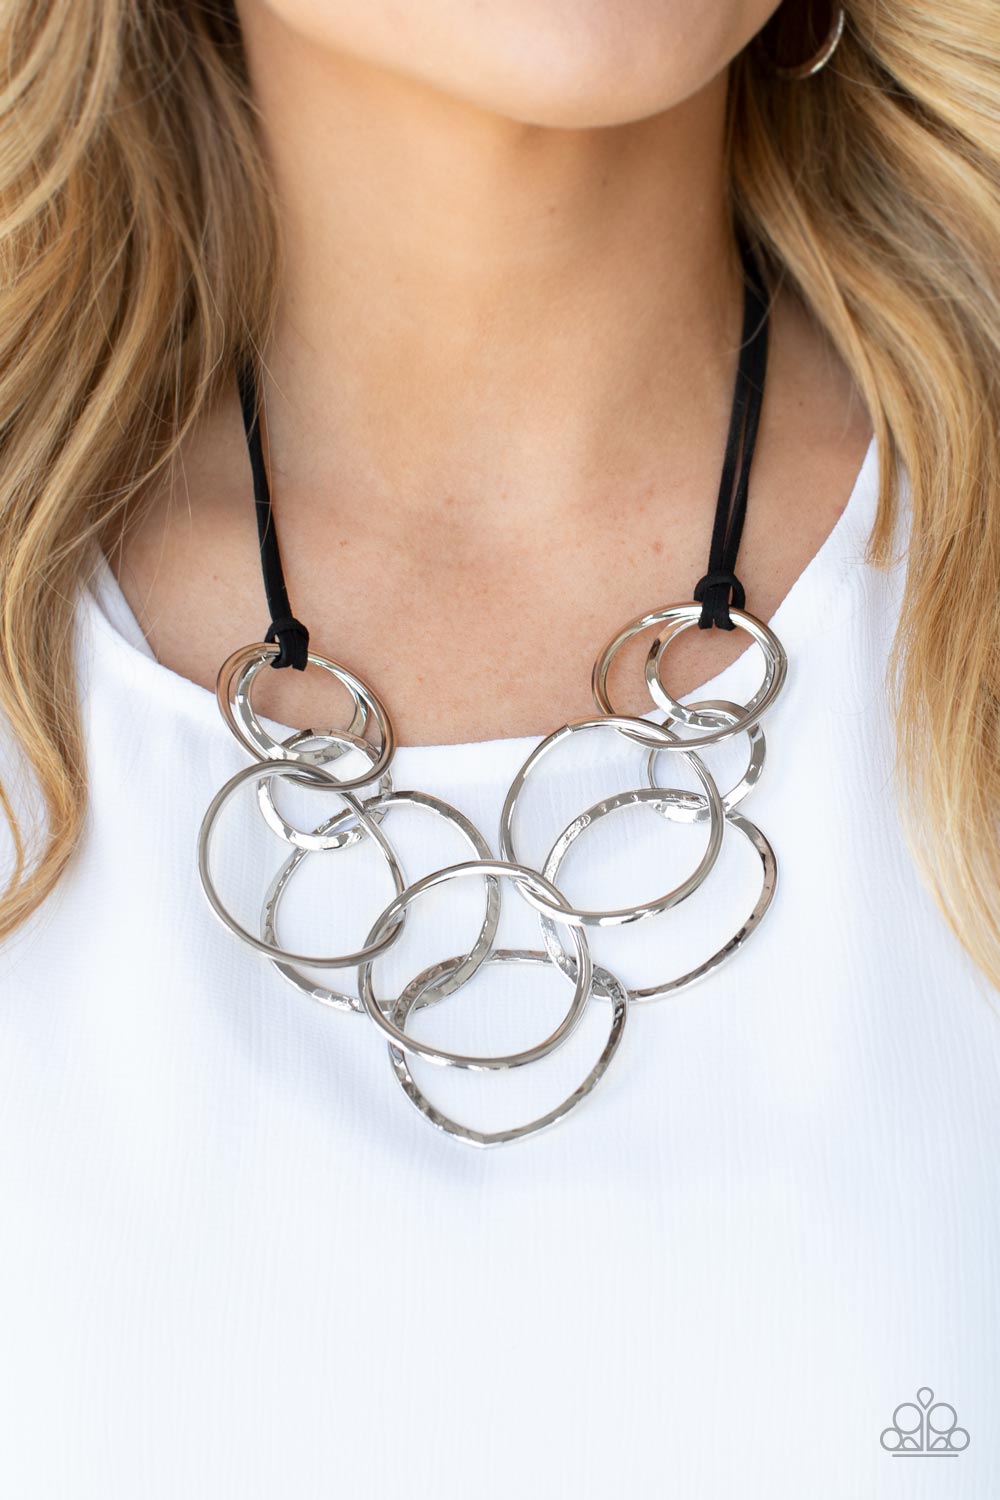 Spiraling Out of COUTURE Silver and Black Necklace - Paparazzi Accessories- lightbox - CarasShop.com - $5 Jewelry by Cara Jewels